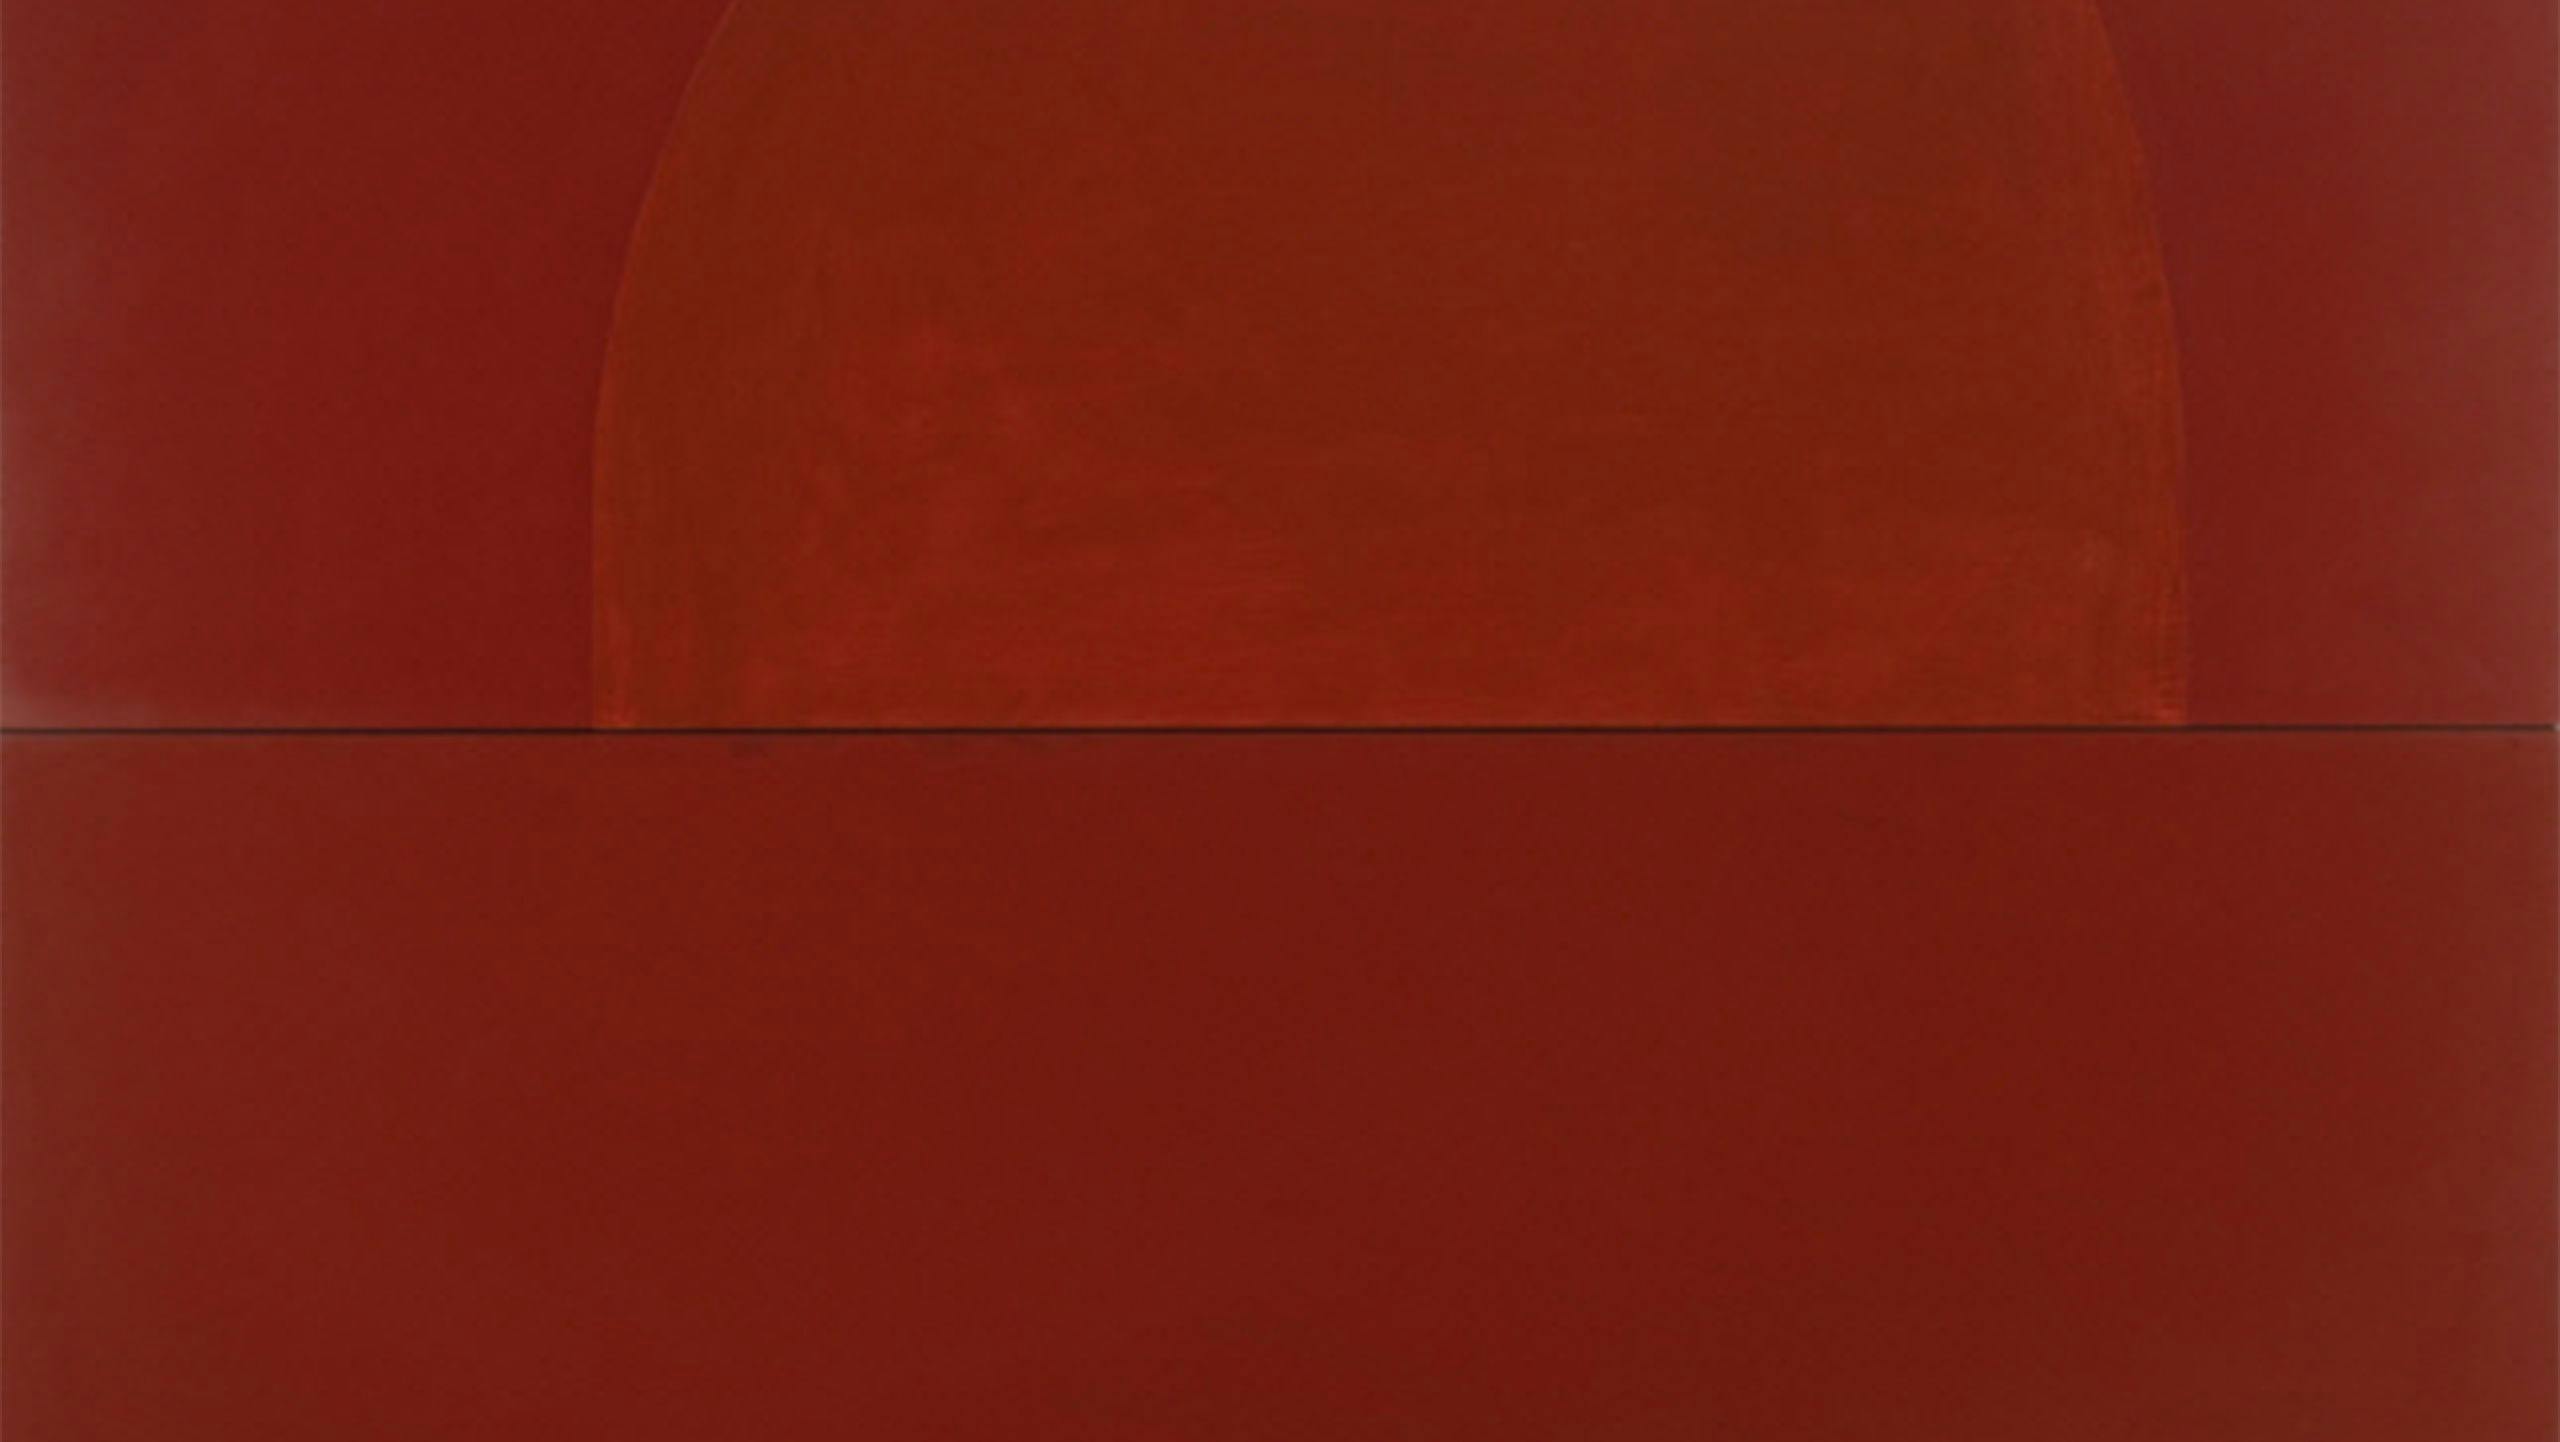 Painting by Suzan Frecon, titled version 13, from the Collection of the Menil Collection in Houston, dated 2010 and 2023.